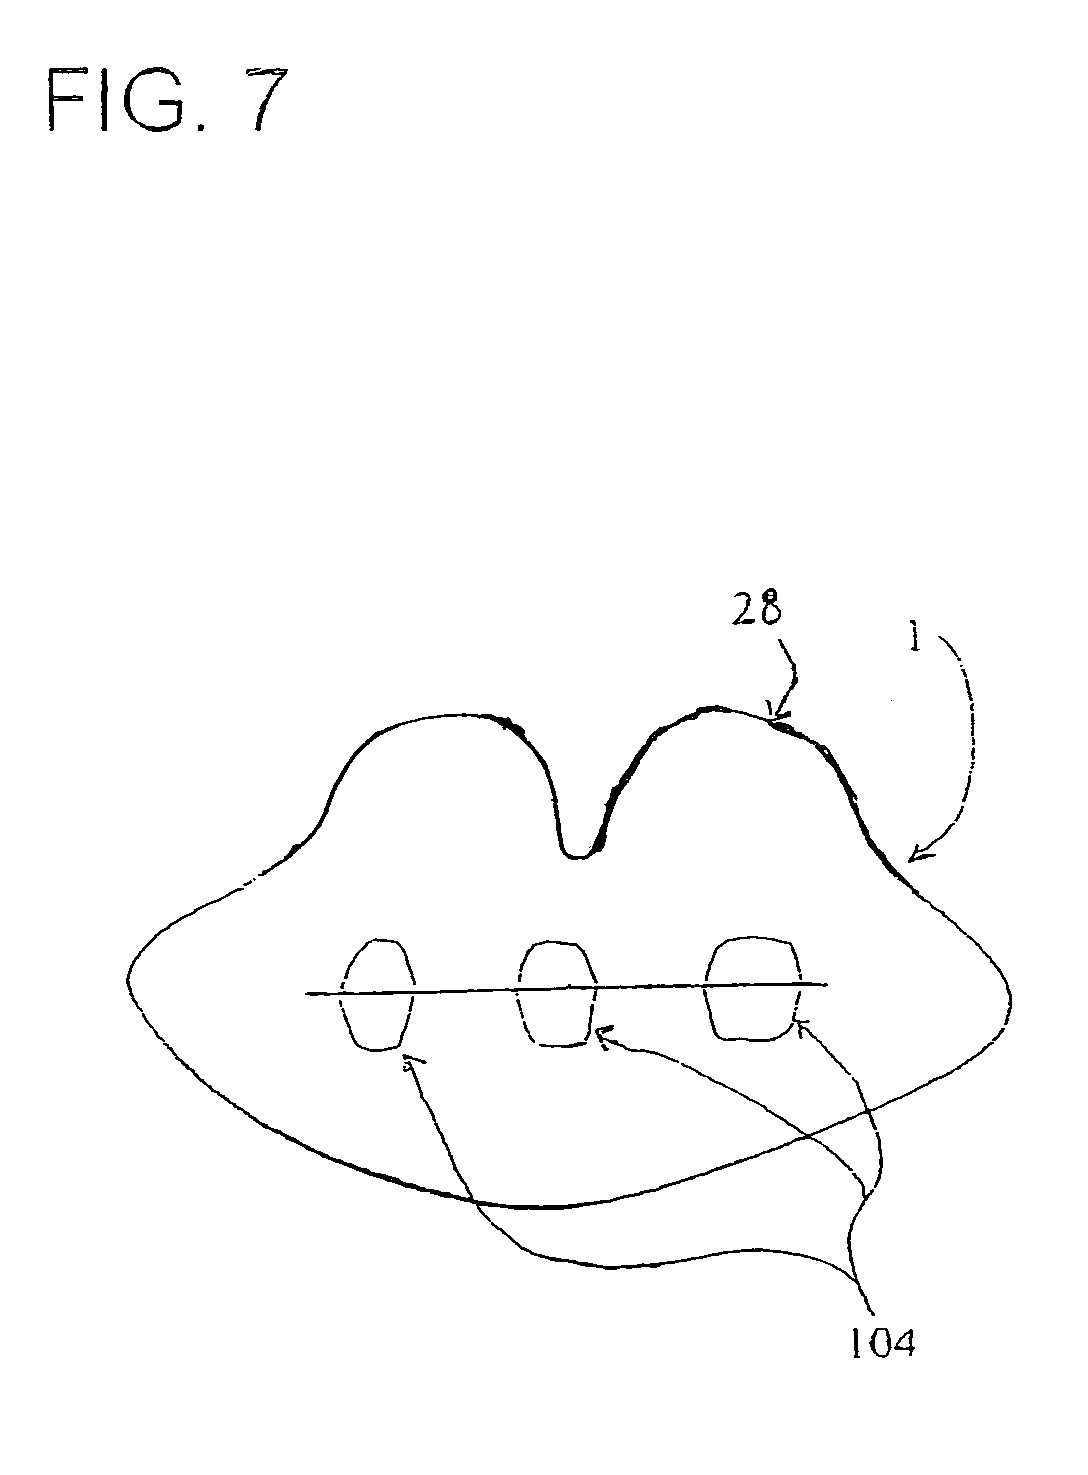 Appliance, system and method for preventing snoring